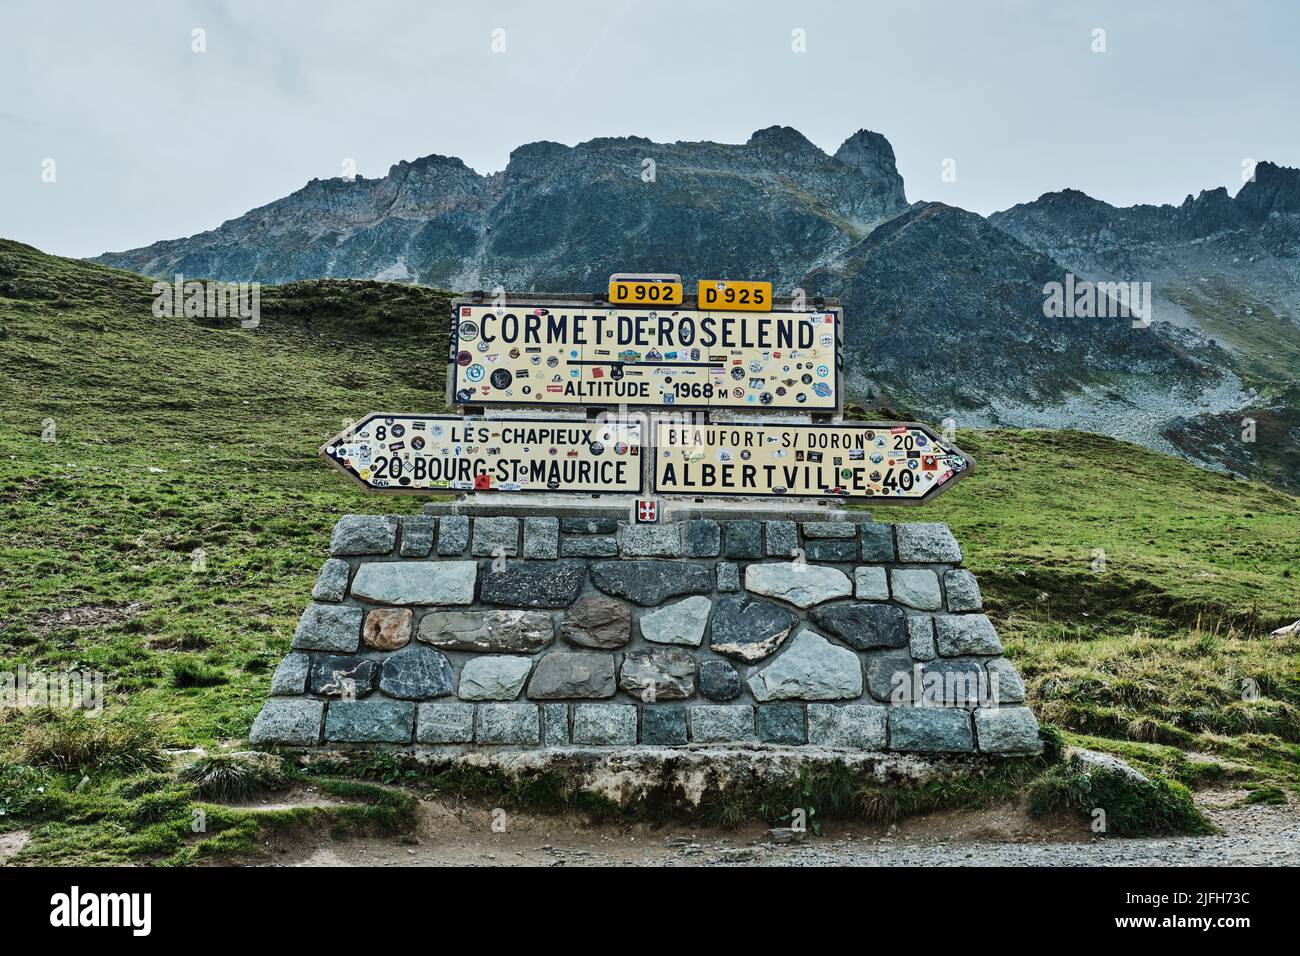 Road sign of Cormet de Roselend stage on the tour de france in the french alps Stock Photo